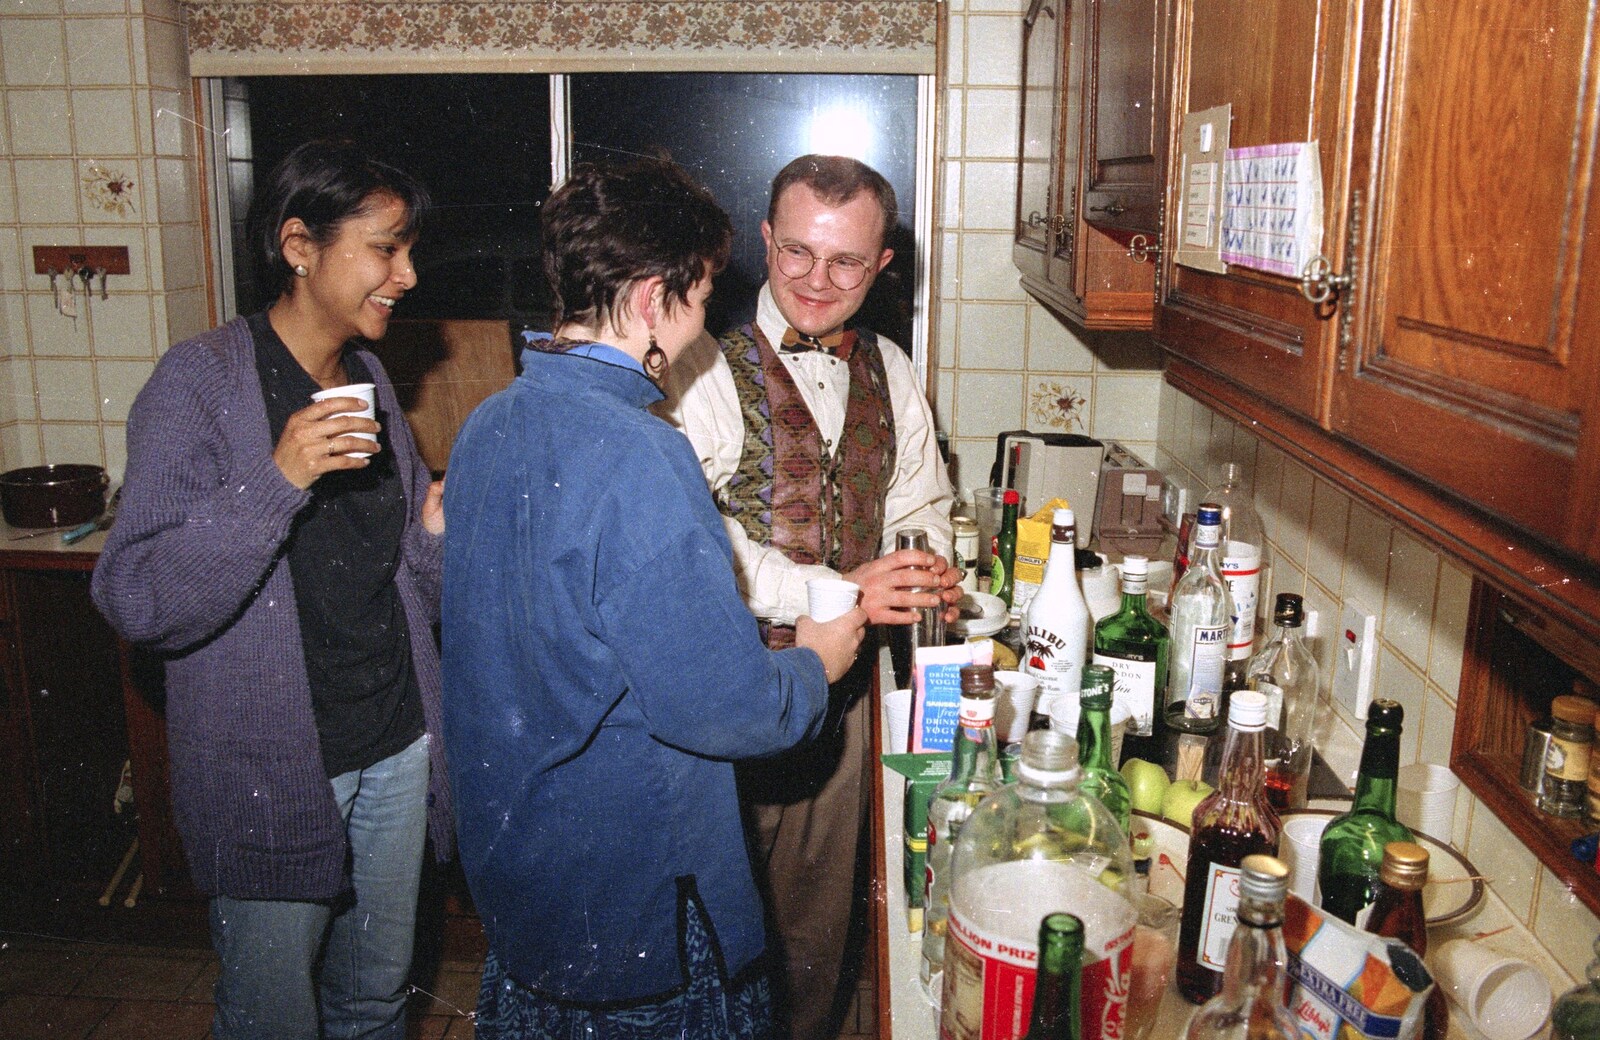 Hamish's Oxford Party, Oxfordshire - 25th April 1992: Hamish mixes up cocktails